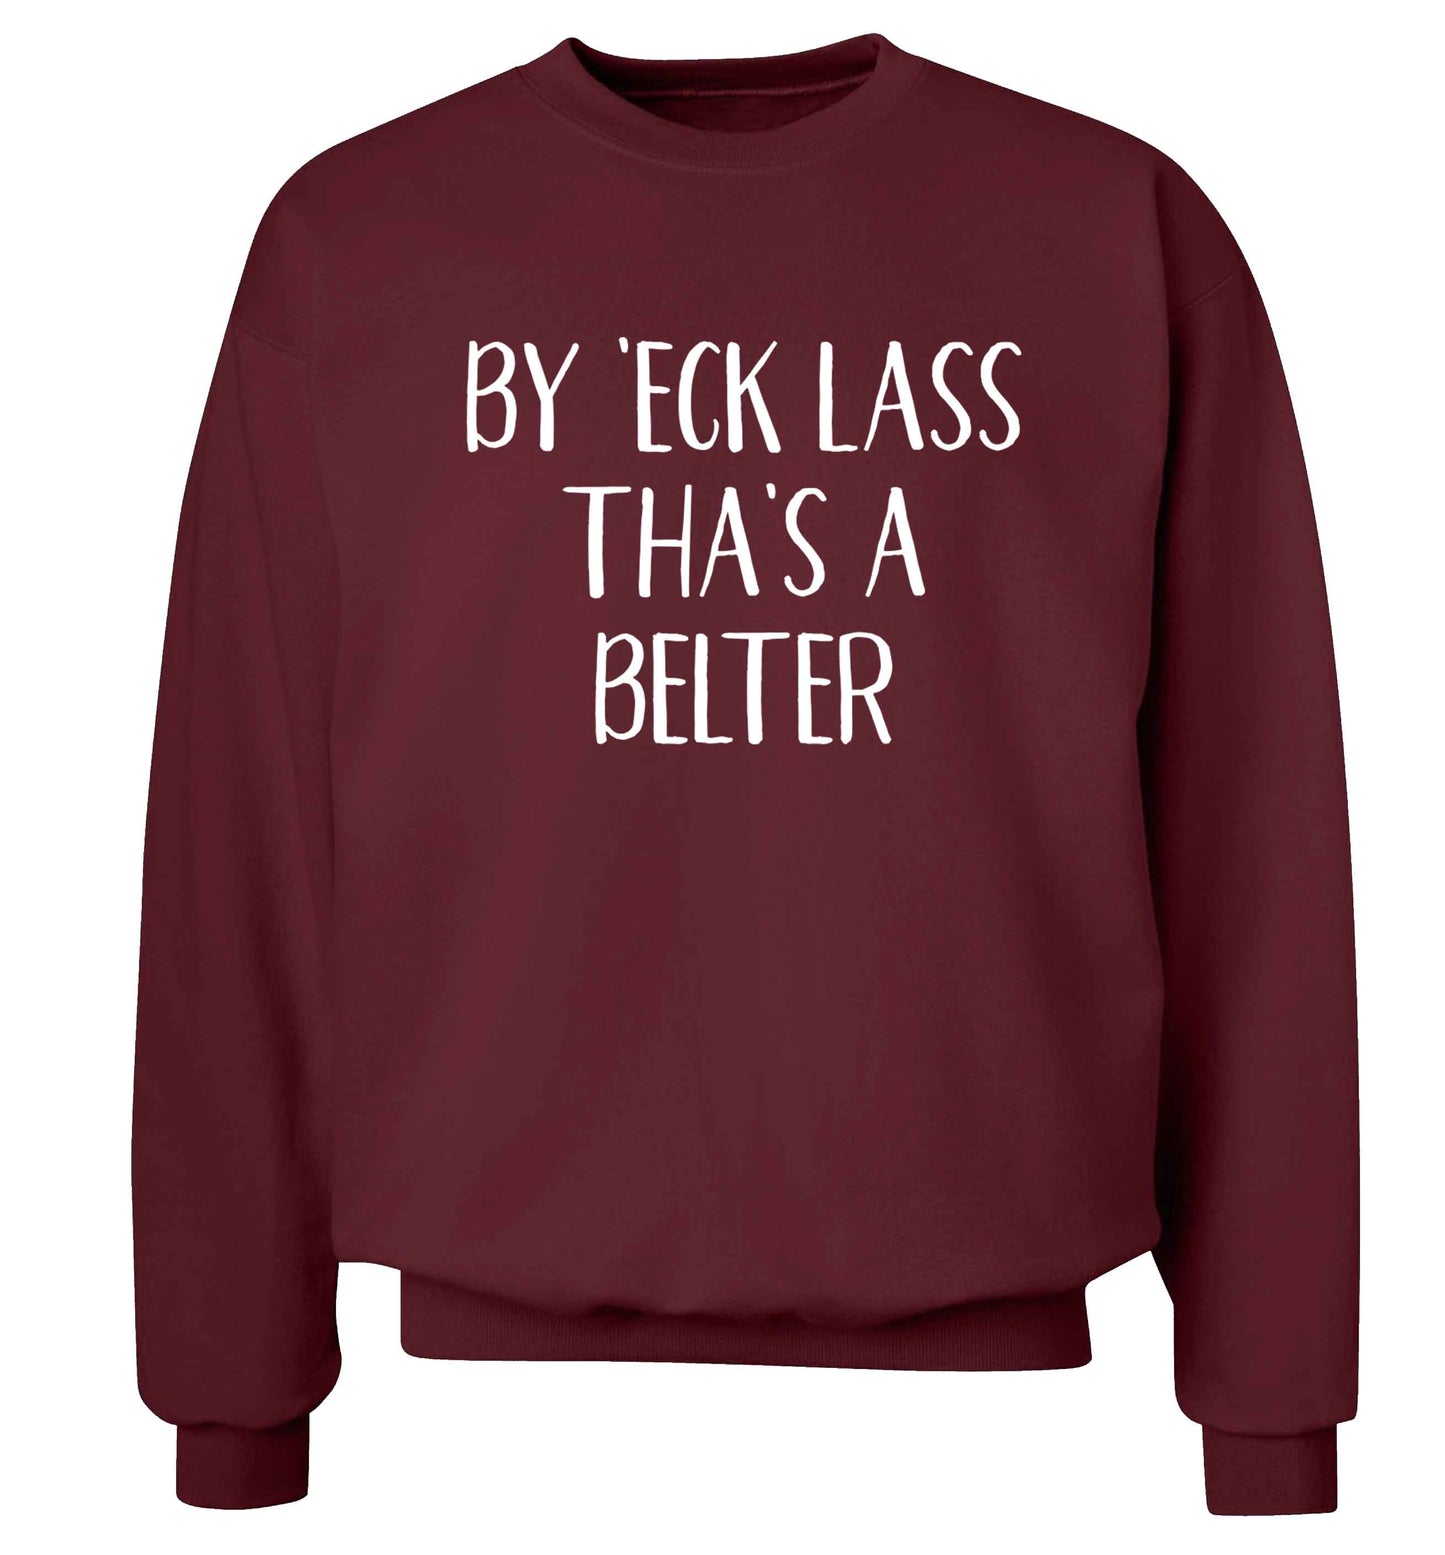 Be 'eck lass tha's a belter Adult's unisex maroon Sweater 2XL